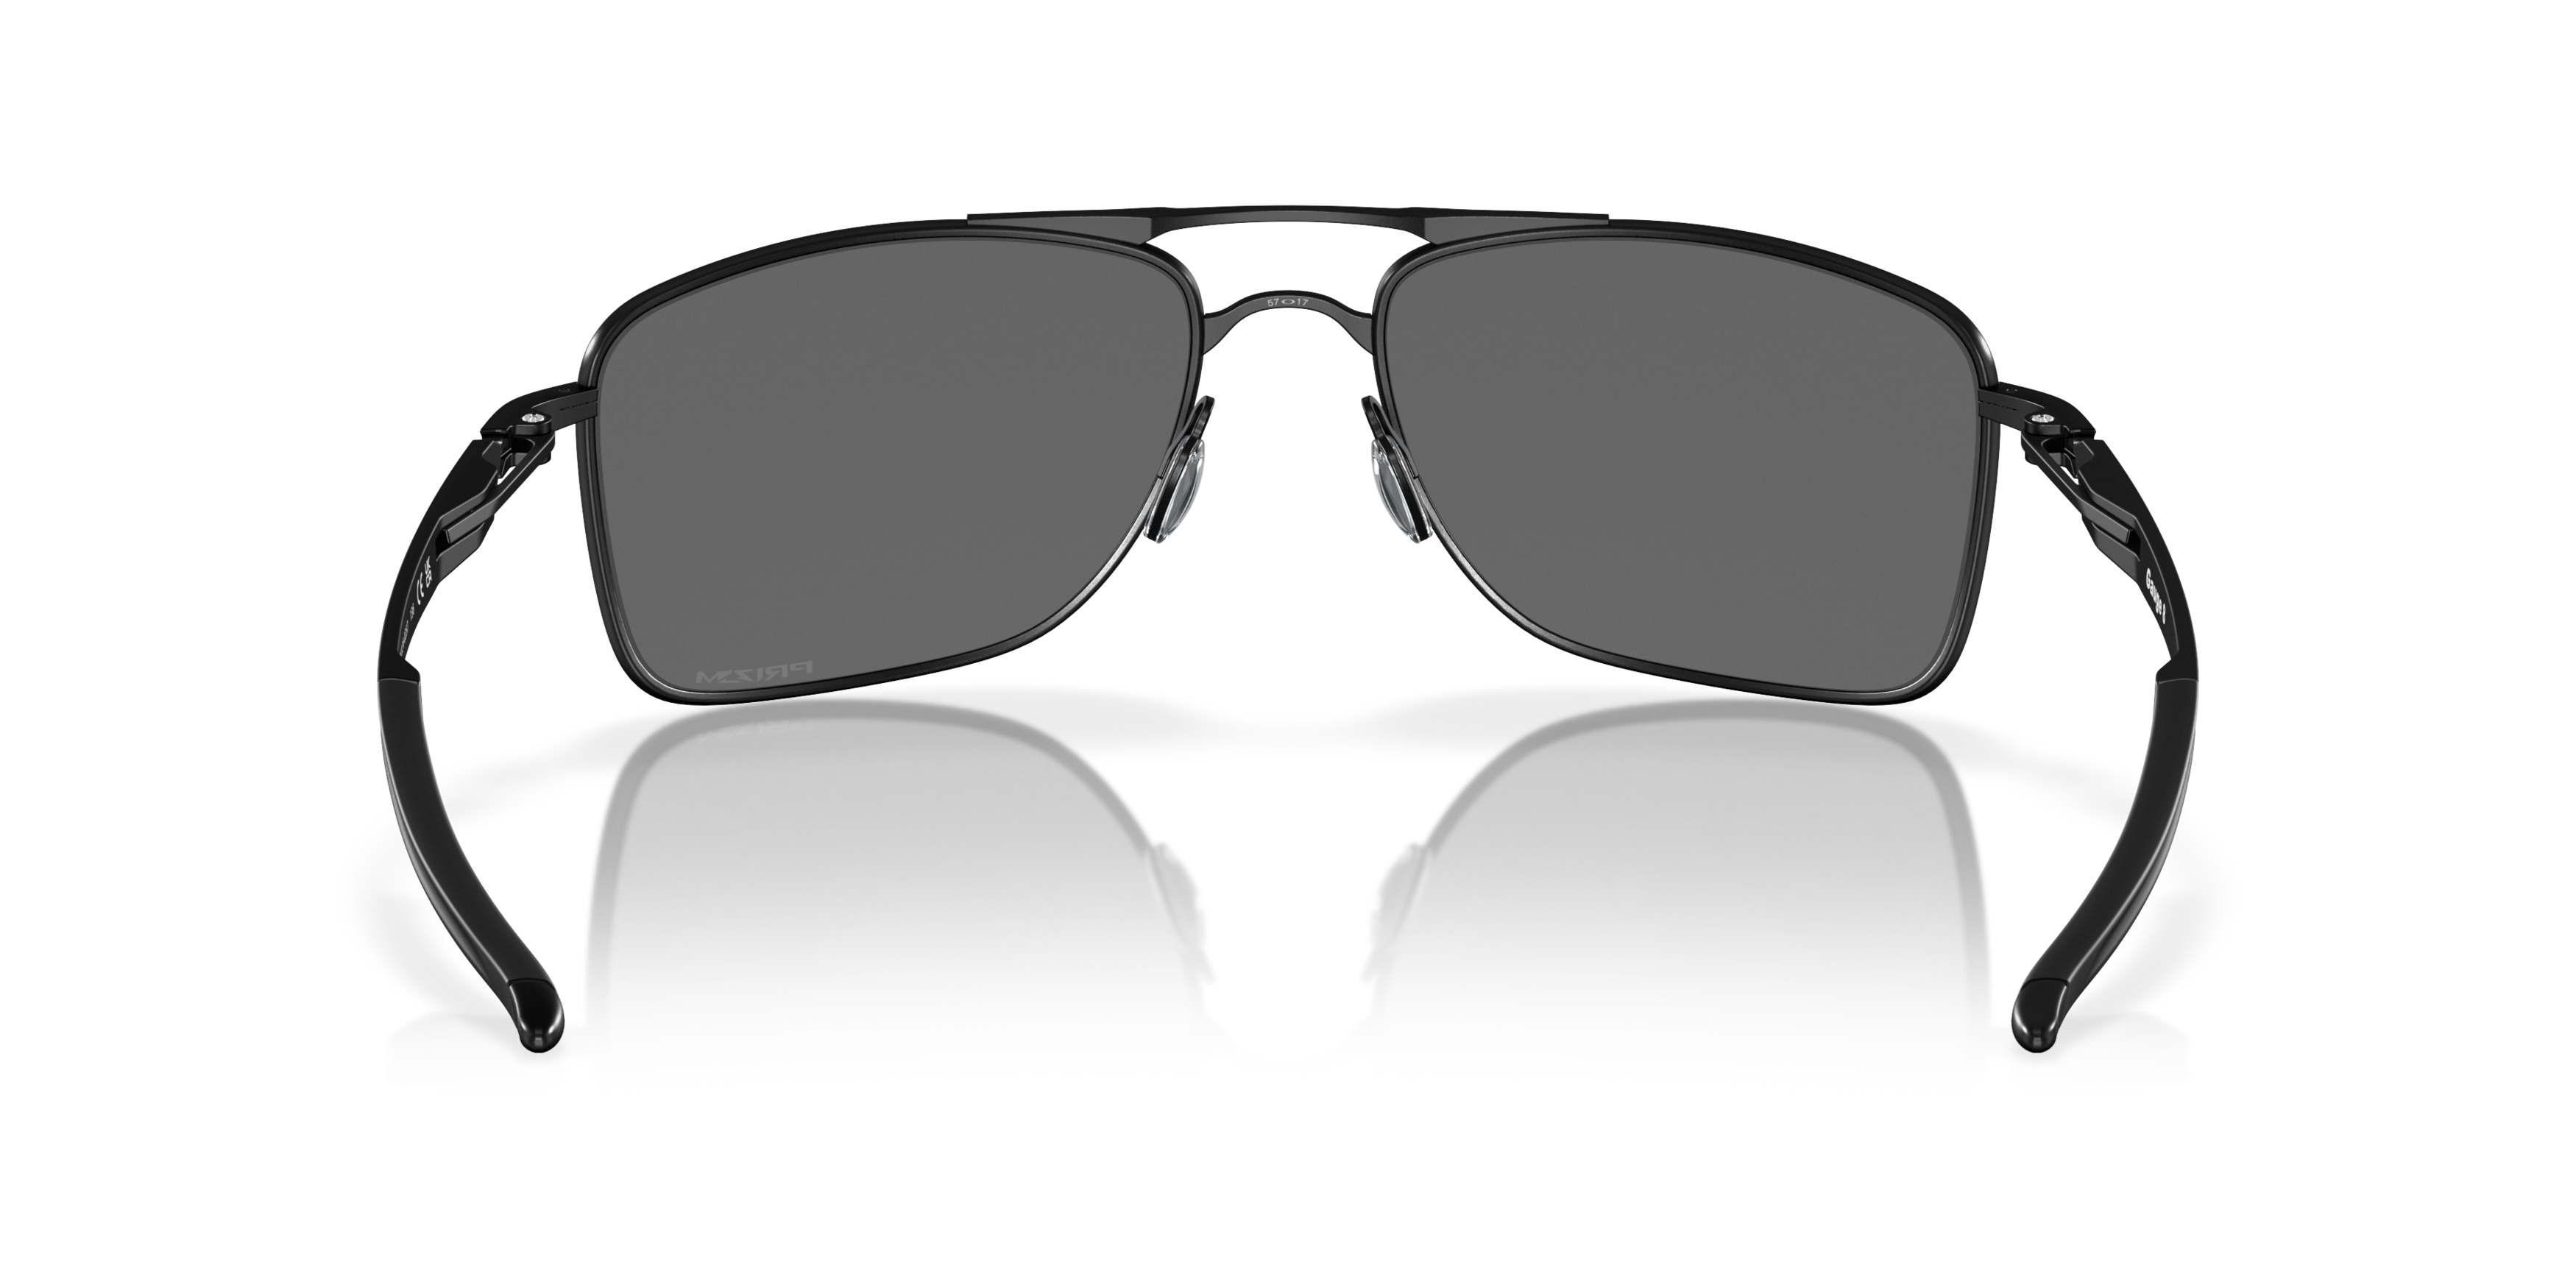 [products.image.detail02] OAKLEY GRAUGE 8 OO4124 412402